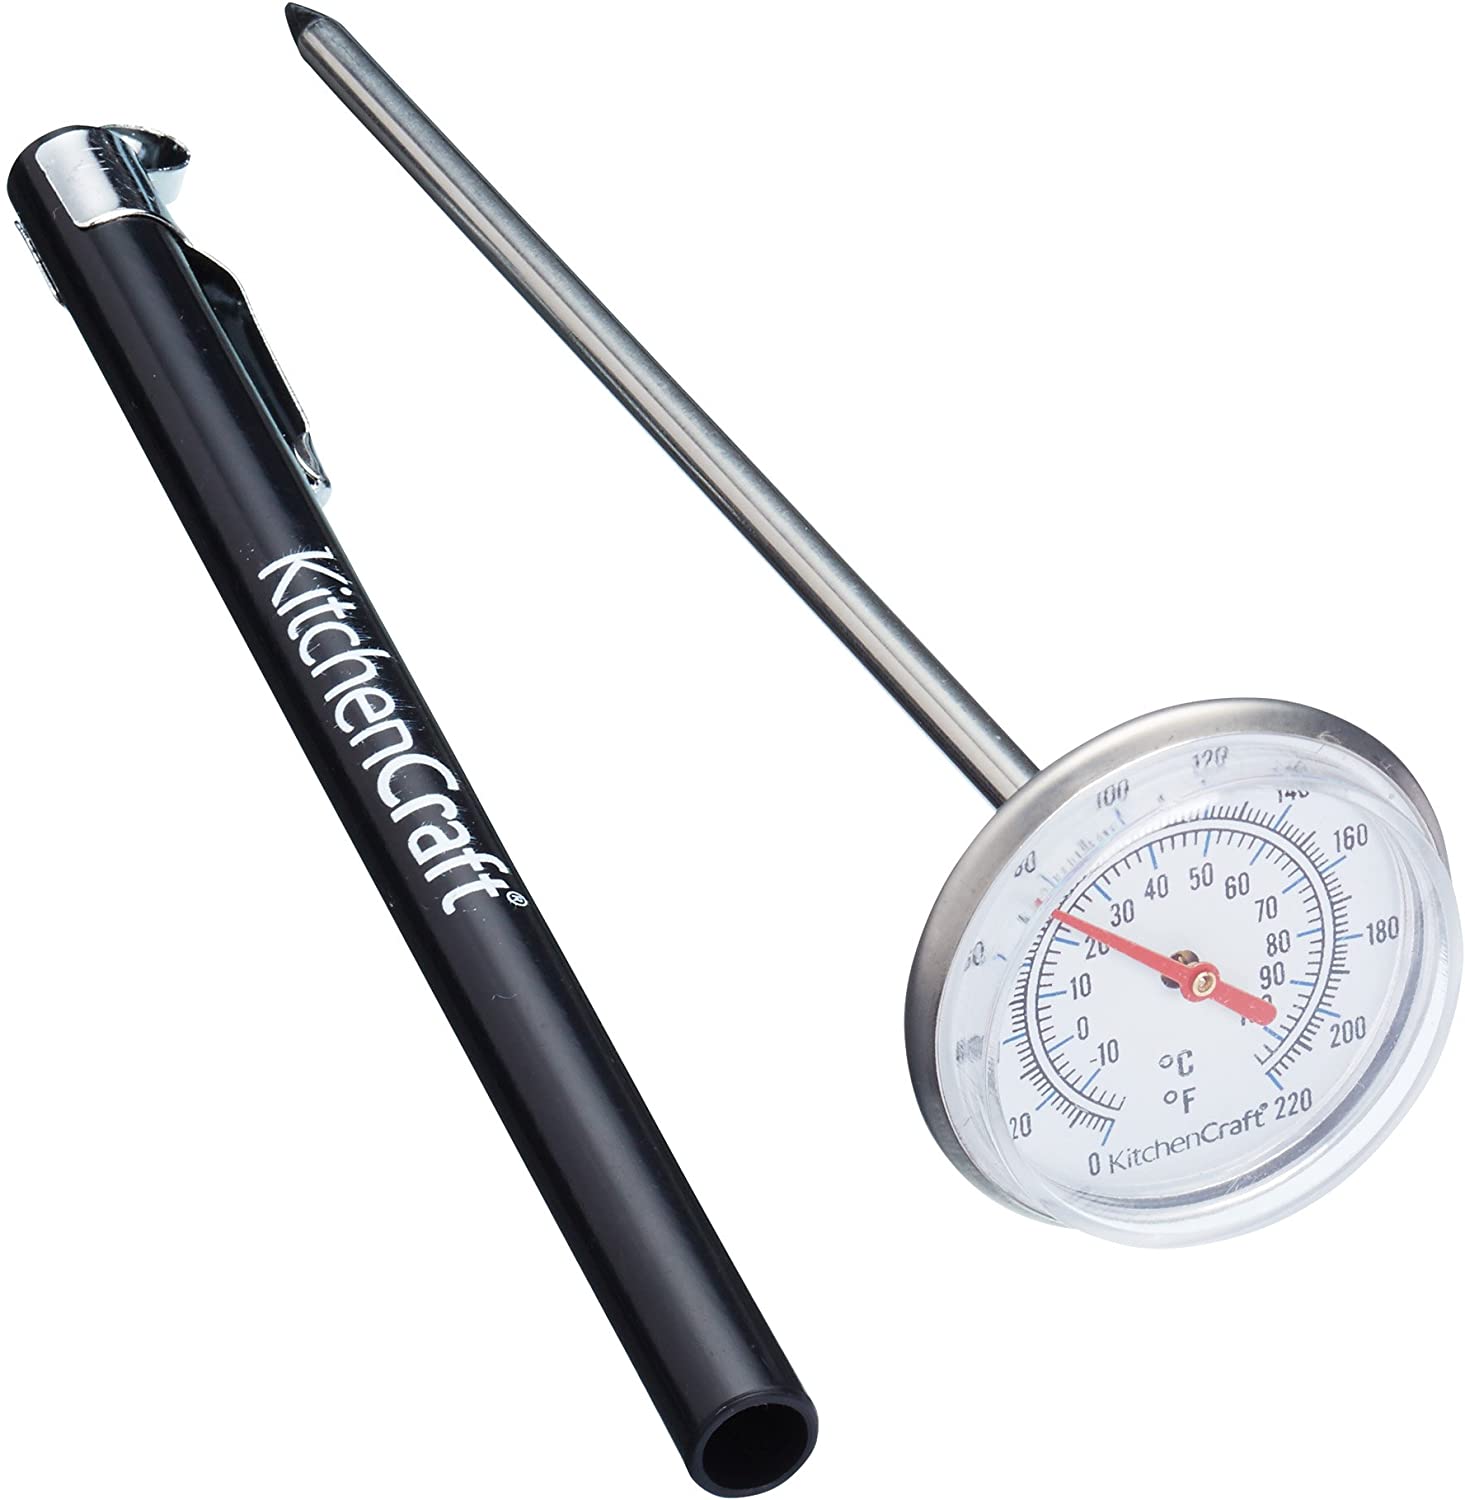 Kitchen Craft Stainless Steel Meat Thermometer with Bag Ideutz Container